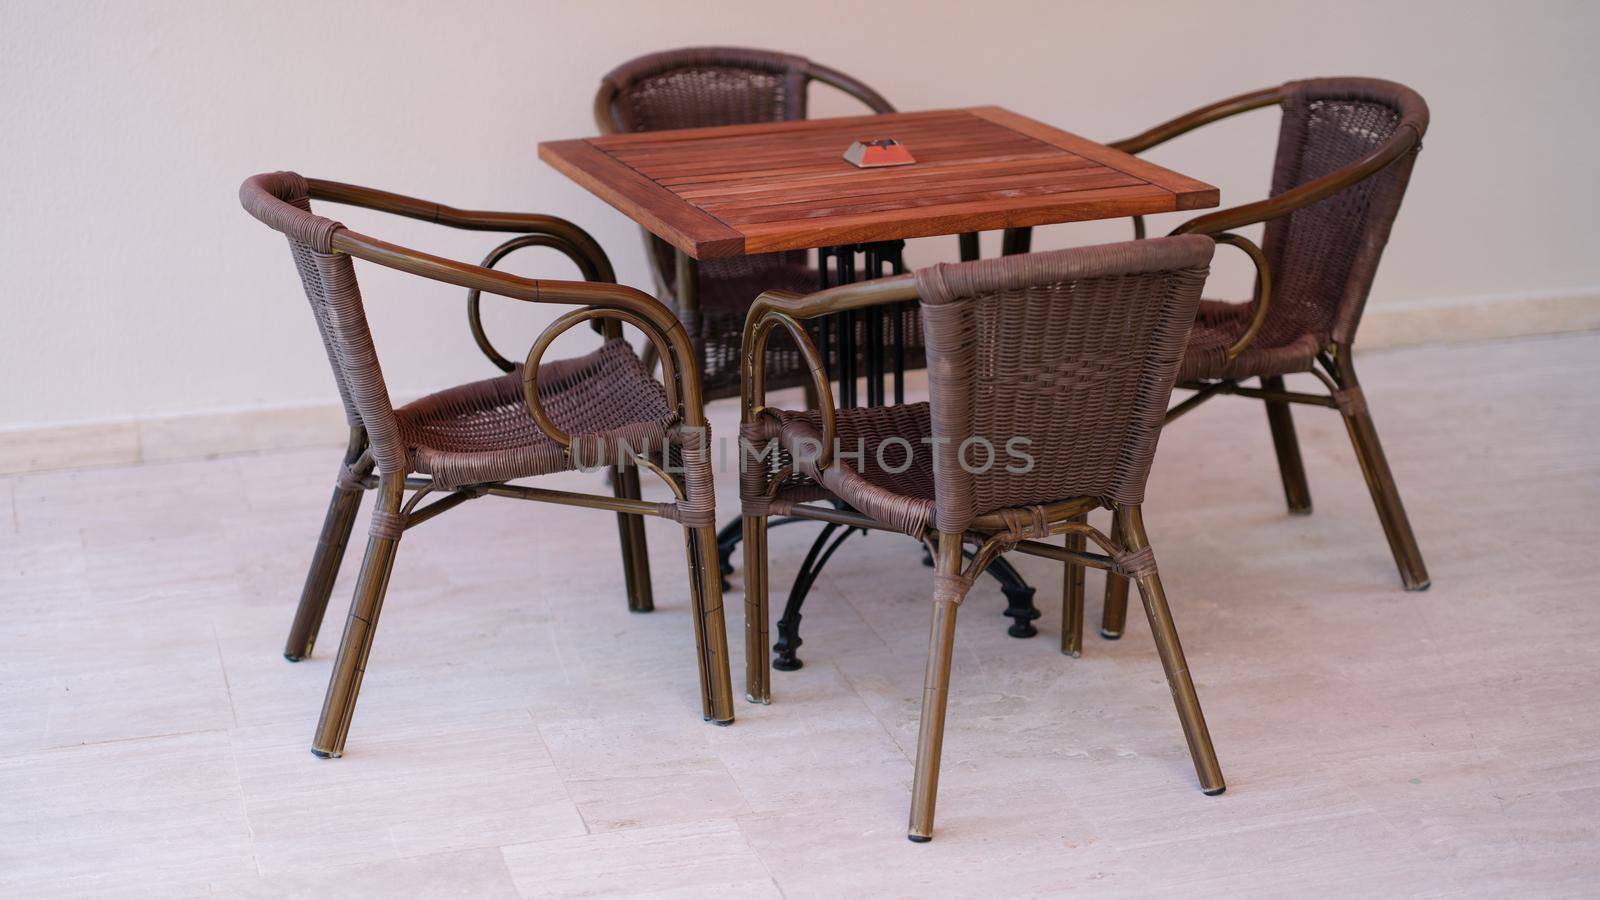 Wicker chairs and wooden table outside closeup by kuprevich